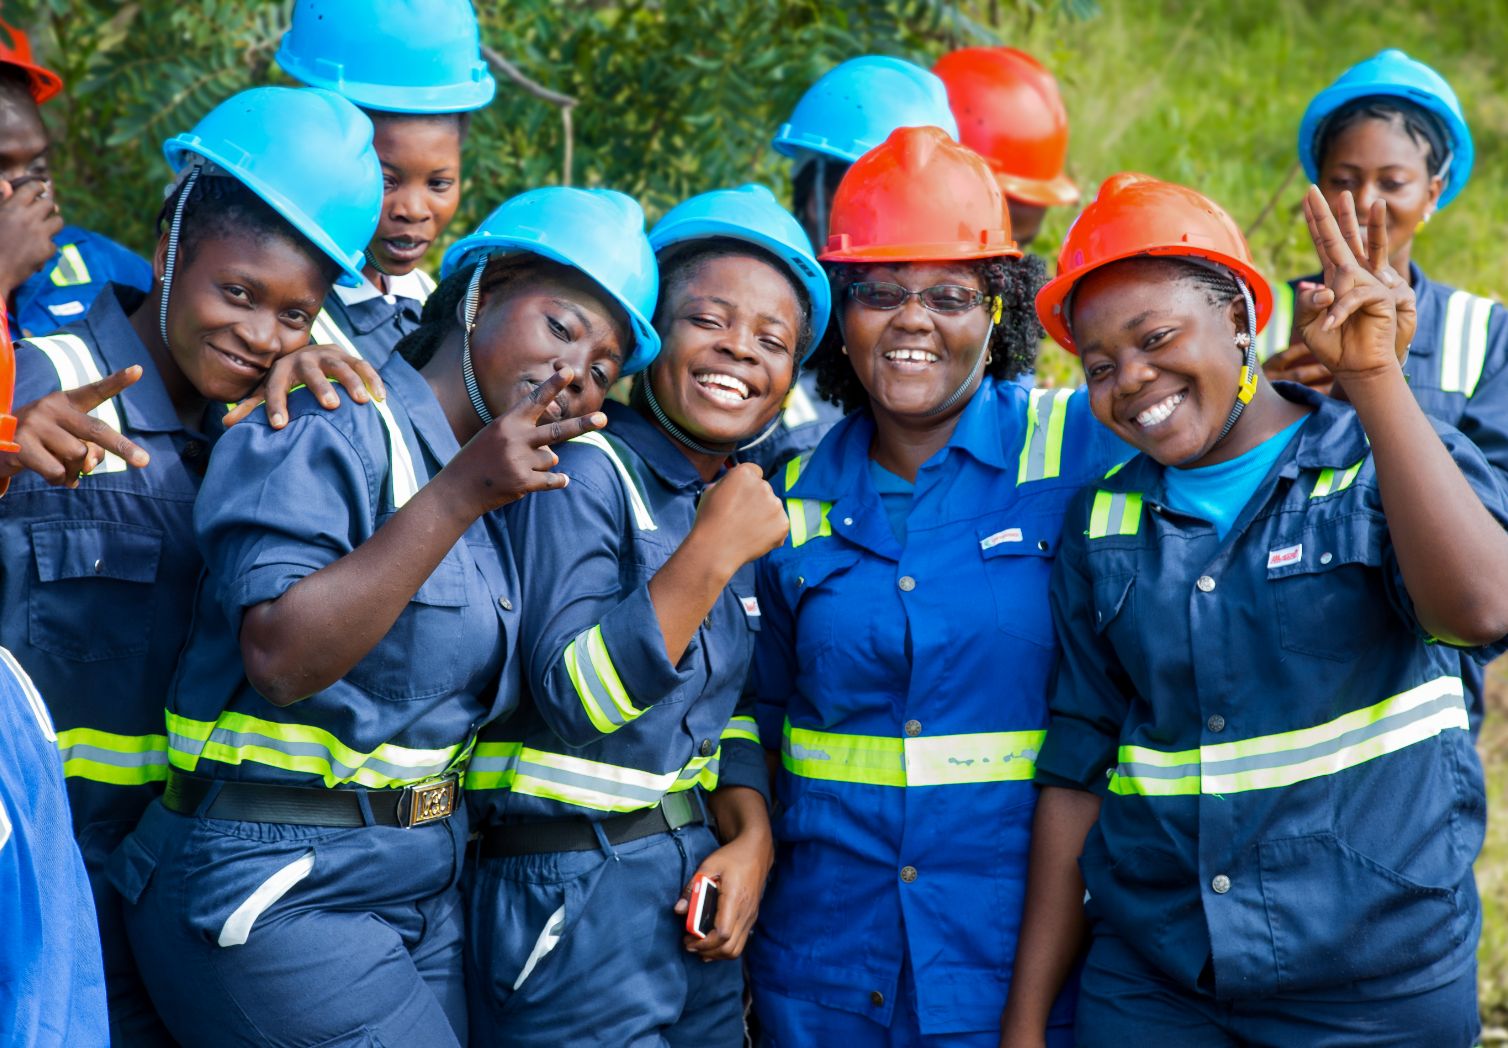 Group photo: Several women in work clothes and helmets are smiling.